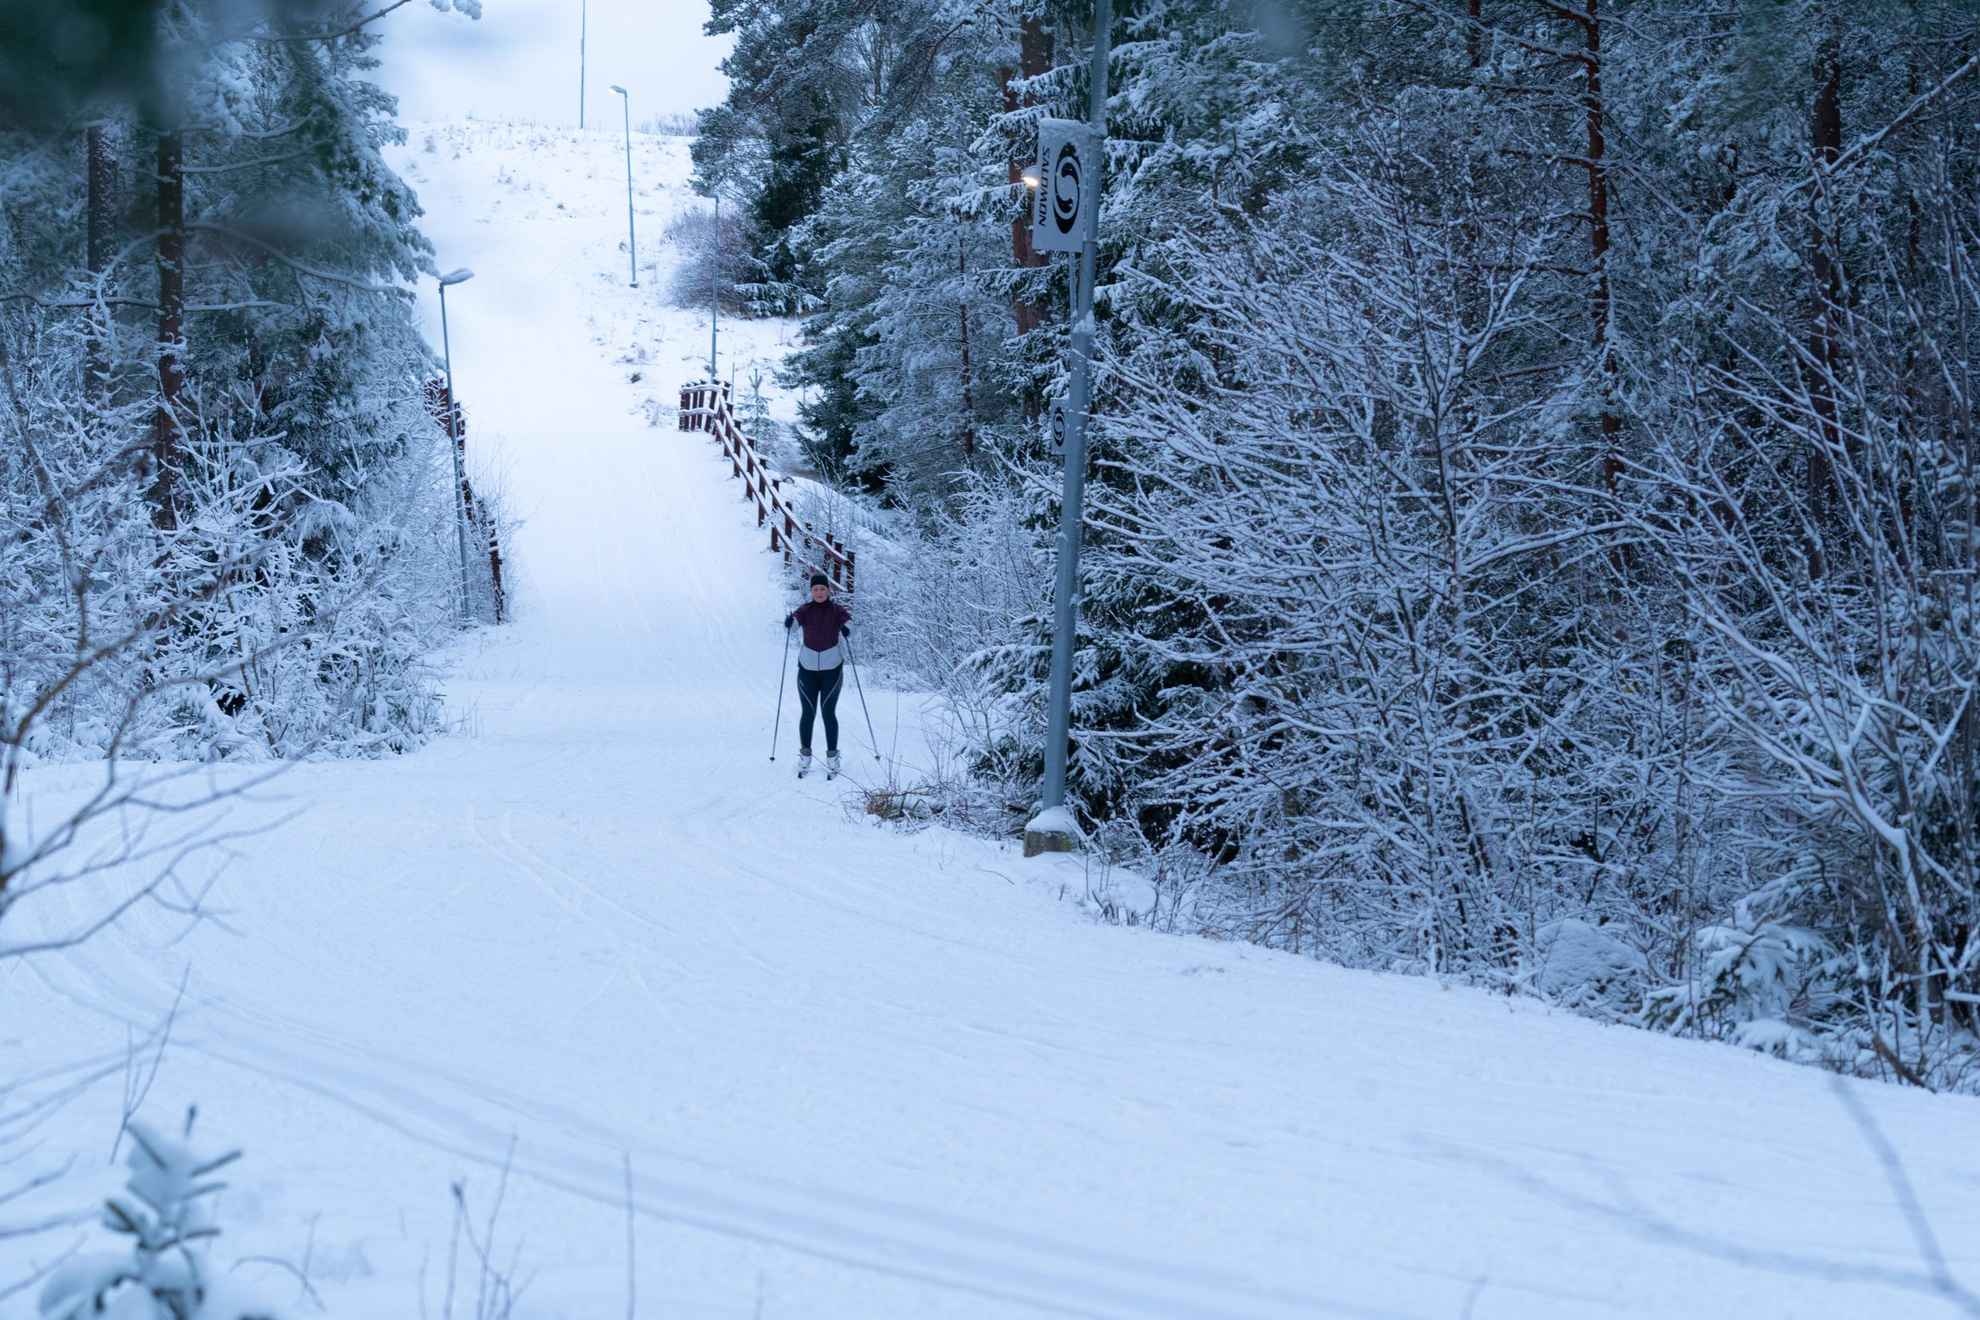 A person is cross-country skiing in prepared tracks in nature.